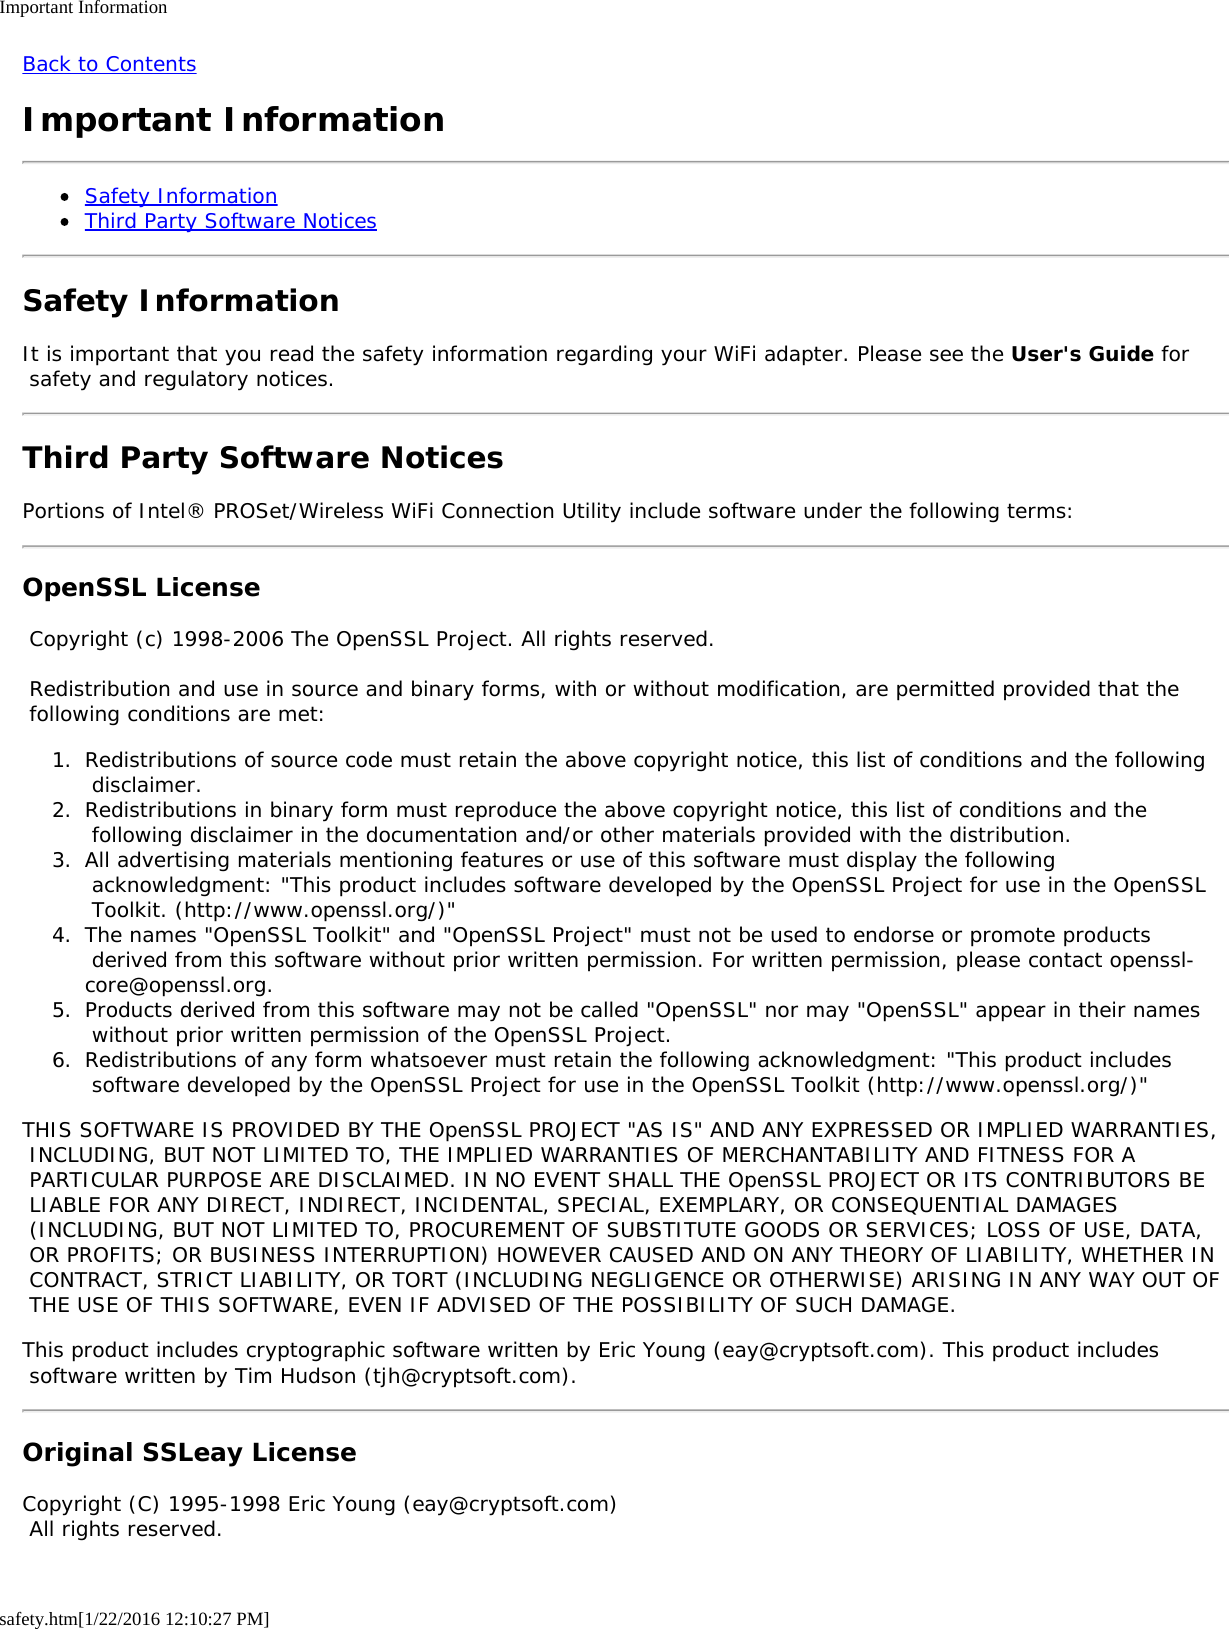 Important Informationsafety.htm[1/22/2016 12:10:27 PM]Back to ContentsImportant InformationSafety InformationThird Party Software NoticesSafety InformationIt is important that you read the safety information regarding your WiFi adapter. Please see the User&apos;s Guide for safety and regulatory notices.Third Party Software NoticesPortions of Intel® PROSet/Wireless WiFi Connection Utility include software under the following terms:OpenSSL License Copyright (c) 1998-2006 The OpenSSL Project. All rights reserved. Redistribution and use in source and binary forms, with or without modification, are permitted provided that the following conditions are met:1.  Redistributions of source code must retain the above copyright notice, this list of conditions and the following disclaimer.2.  Redistributions in binary form must reproduce the above copyright notice, this list of conditions and the following disclaimer in the documentation and/or other materials provided with the distribution.3.  All advertising materials mentioning features or use of this software must display the following acknowledgment: &quot;This product includes software developed by the OpenSSL Project for use in the OpenSSL Toolkit. (http://www.openssl.org/)&quot;4.  The names &quot;OpenSSL Toolkit&quot; and &quot;OpenSSL Project&quot; must not be used to endorse or promote products derived from this software without prior written permission. For written permission, please contact openssl-core@openssl.org.5.  Products derived from this software may not be called &quot;OpenSSL&quot; nor may &quot;OpenSSL&quot; appear in their names without prior written permission of the OpenSSL Project.6.  Redistributions of any form whatsoever must retain the following acknowledgment: &quot;This product includes software developed by the OpenSSL Project for use in the OpenSSL Toolkit (http://www.openssl.org/)&quot;THIS SOFTWARE IS PROVIDED BY THE OpenSSL PROJECT &quot;AS IS&quot; AND ANY EXPRESSED OR IMPLIED WARRANTIES, INCLUDING, BUT NOT LIMITED TO, THE IMPLIED WARRANTIES OF MERCHANTABILITY AND FITNESS FOR A PARTICULAR PURPOSE ARE DISCLAIMED. IN NO EVENT SHALL THE OpenSSL PROJECT OR ITS CONTRIBUTORS BE LIABLE FOR ANY DIRECT, INDIRECT, INCIDENTAL, SPECIAL, EXEMPLARY, OR CONSEQUENTIAL DAMAGES (INCLUDING, BUT NOT LIMITED TO, PROCUREMENT OF SUBSTITUTE GOODS OR SERVICES; LOSS OF USE, DATA, OR PROFITS; OR BUSINESS INTERRUPTION) HOWEVER CAUSED AND ON ANY THEORY OF LIABILITY, WHETHER IN CONTRACT, STRICT LIABILITY, OR TORT (INCLUDING NEGLIGENCE OR OTHERWISE) ARISING IN ANY WAY OUT OF THE USE OF THIS SOFTWARE, EVEN IF ADVISED OF THE POSSIBILITY OF SUCH DAMAGE.This product includes cryptographic software written by Eric Young (eay@cryptsoft.com). This product includes software written by Tim Hudson (tjh@cryptsoft.com).Original SSLeay LicenseCopyright (C) 1995-1998 Eric Young (eay@cryptsoft.com) All rights reserved.